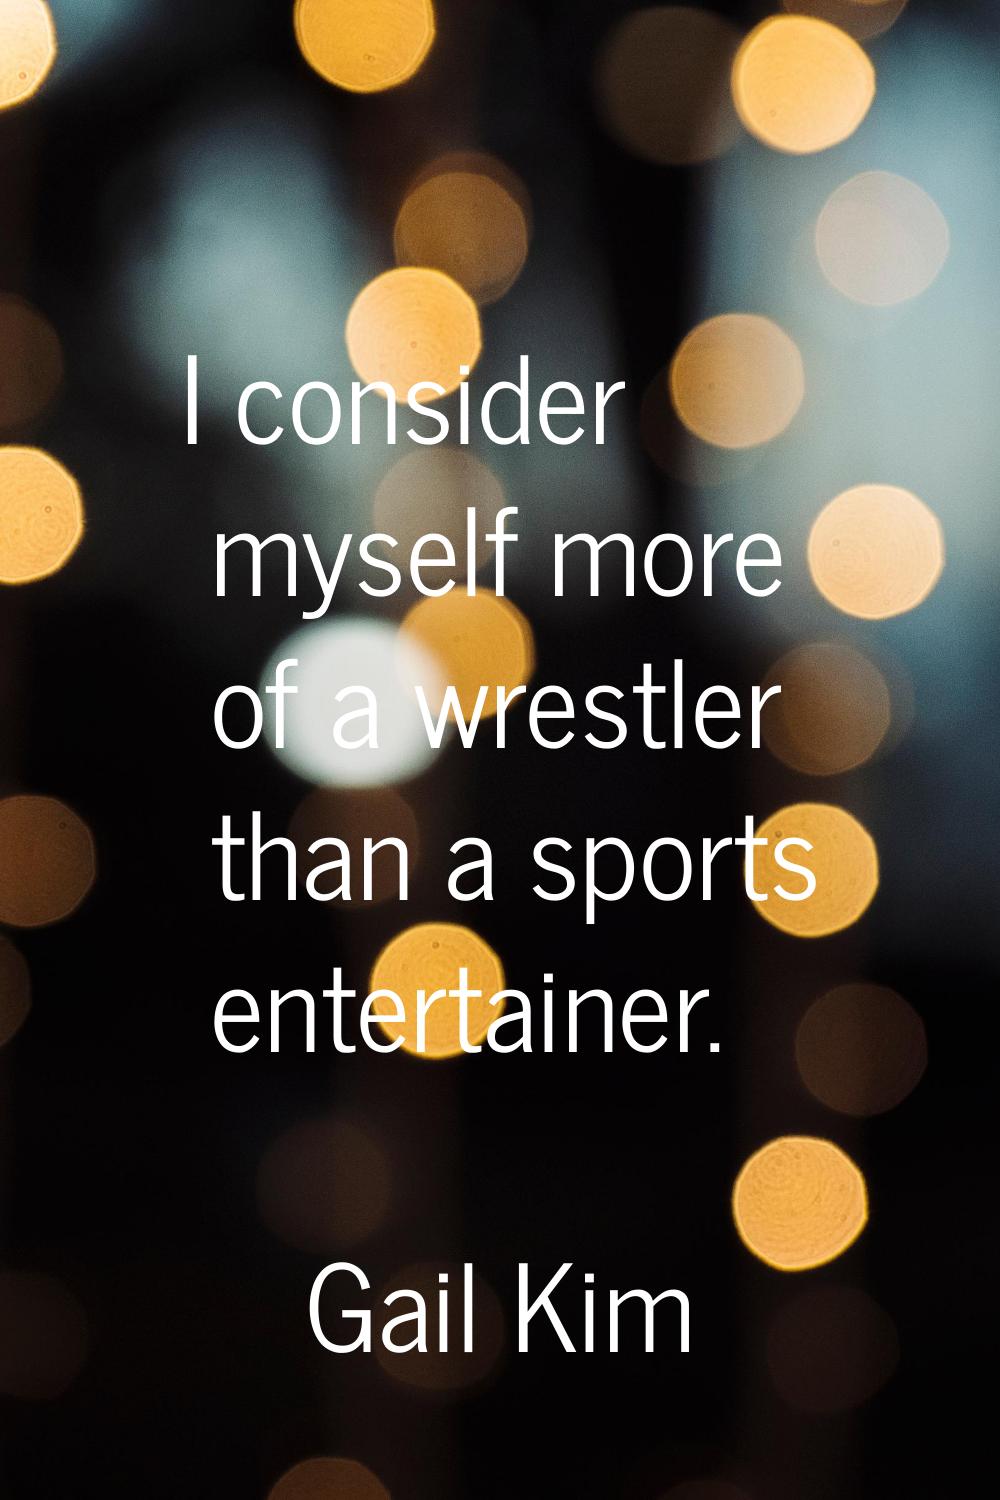 I consider myself more of a wrestler than a sports entertainer.